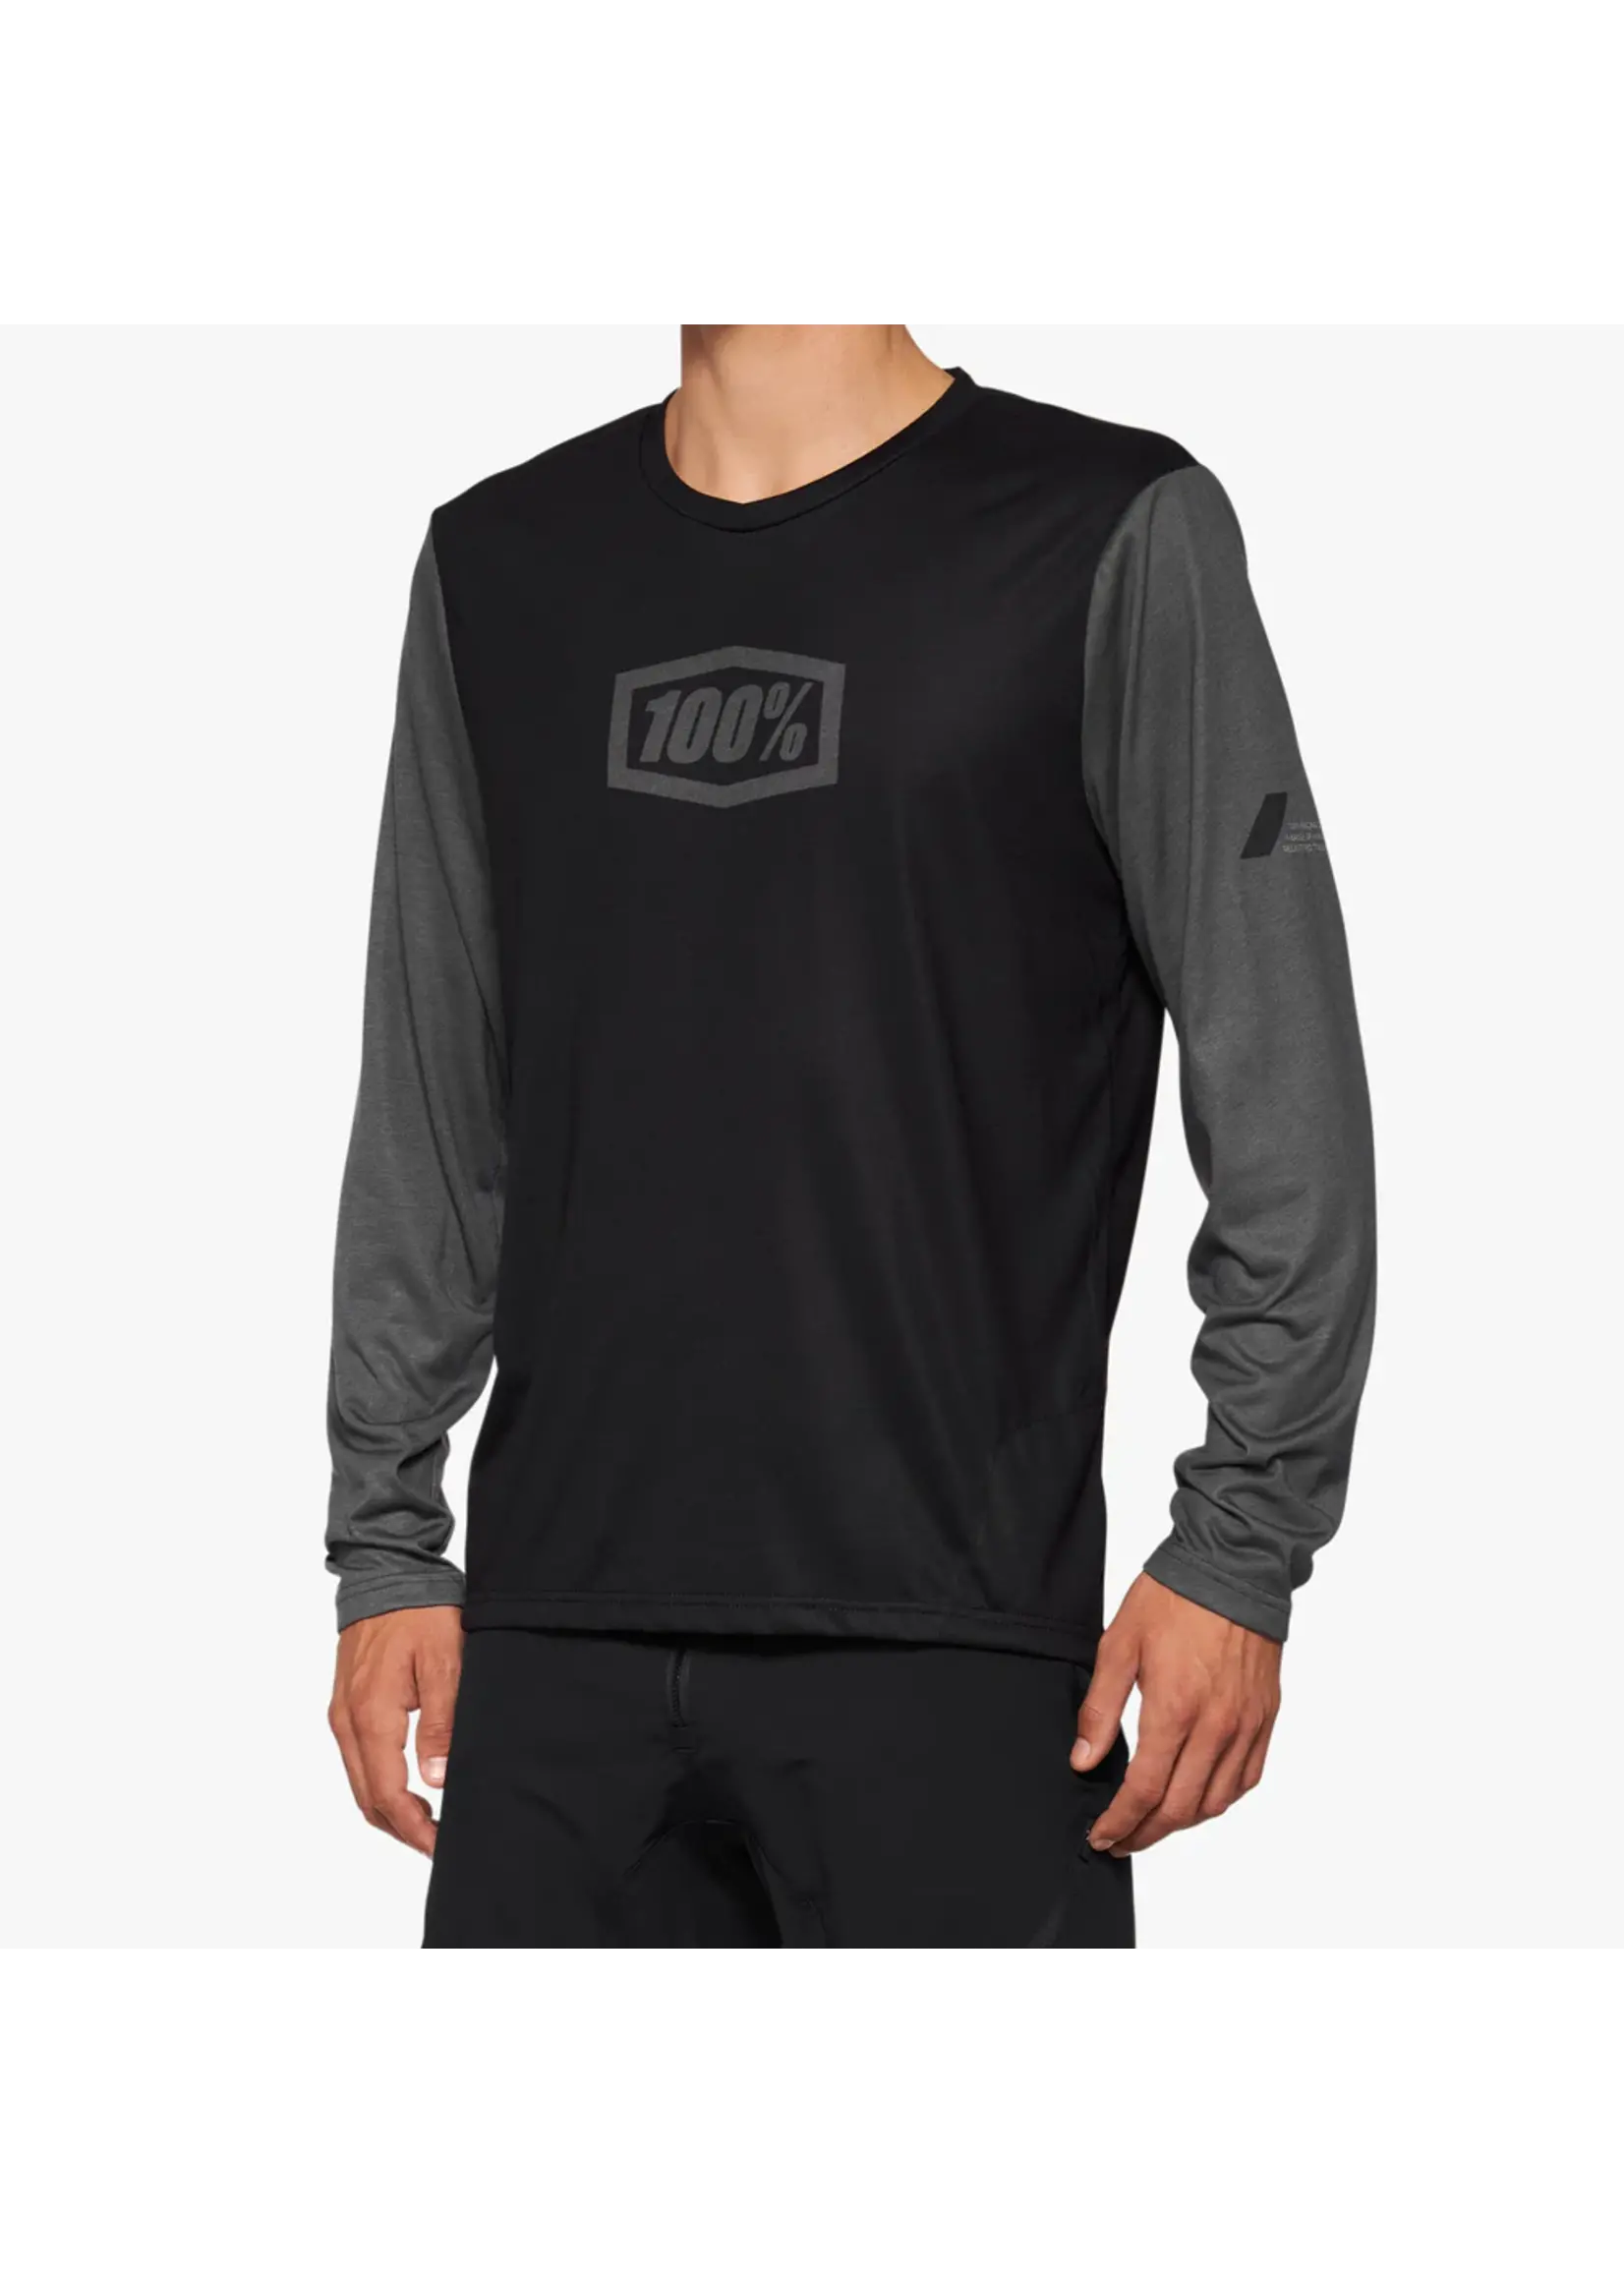 100 Percent 100% AIRMATIC ALL MOUNTAIN LONG SLEEVE JERSEY BLACK